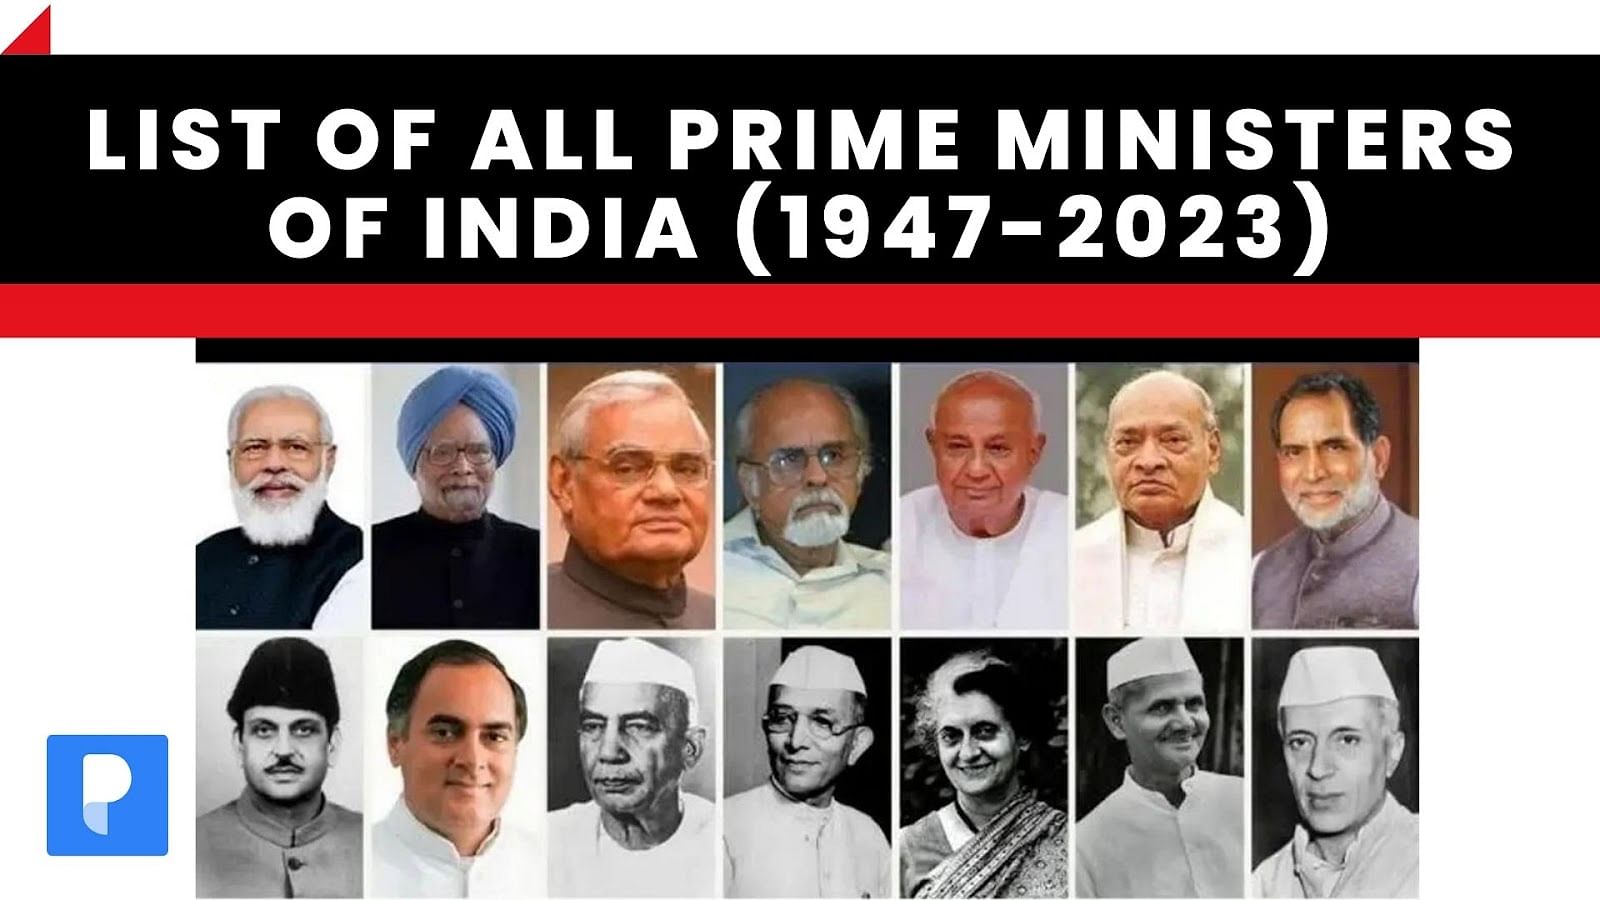 List of all Prime Ministers of India (19472022)